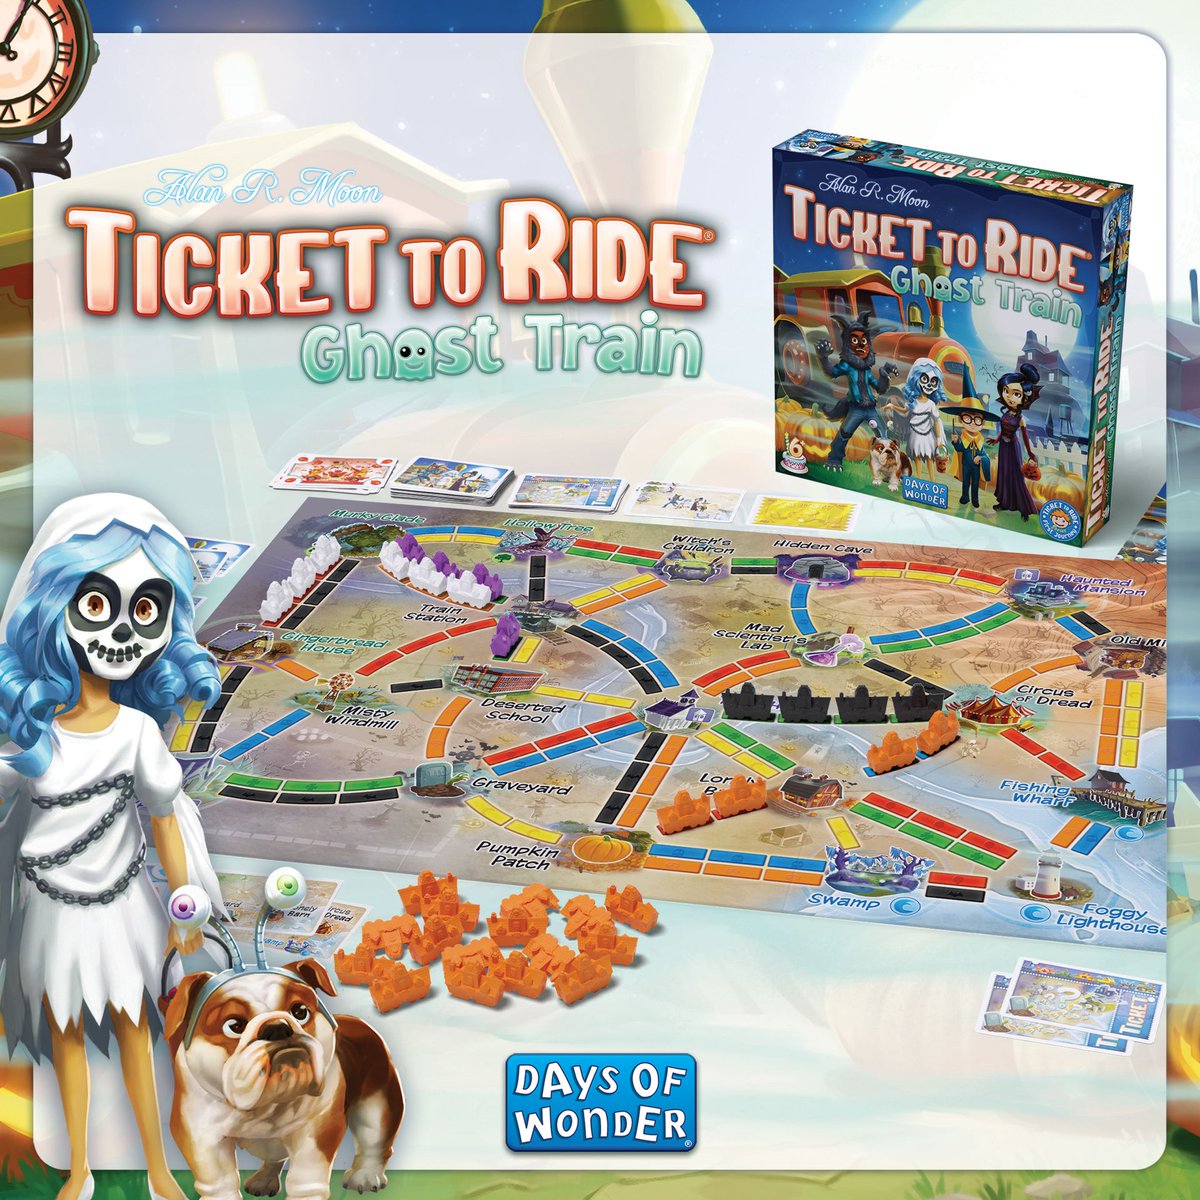 Days of Wonder have announced a haunting edition of the classic Ticket to Ride First Journey, parents and kids collect Parade Float cards to claim routes on the map, and try to visit different locations in this hair-raising town! What a great game to get this this Halloween!🎃👻